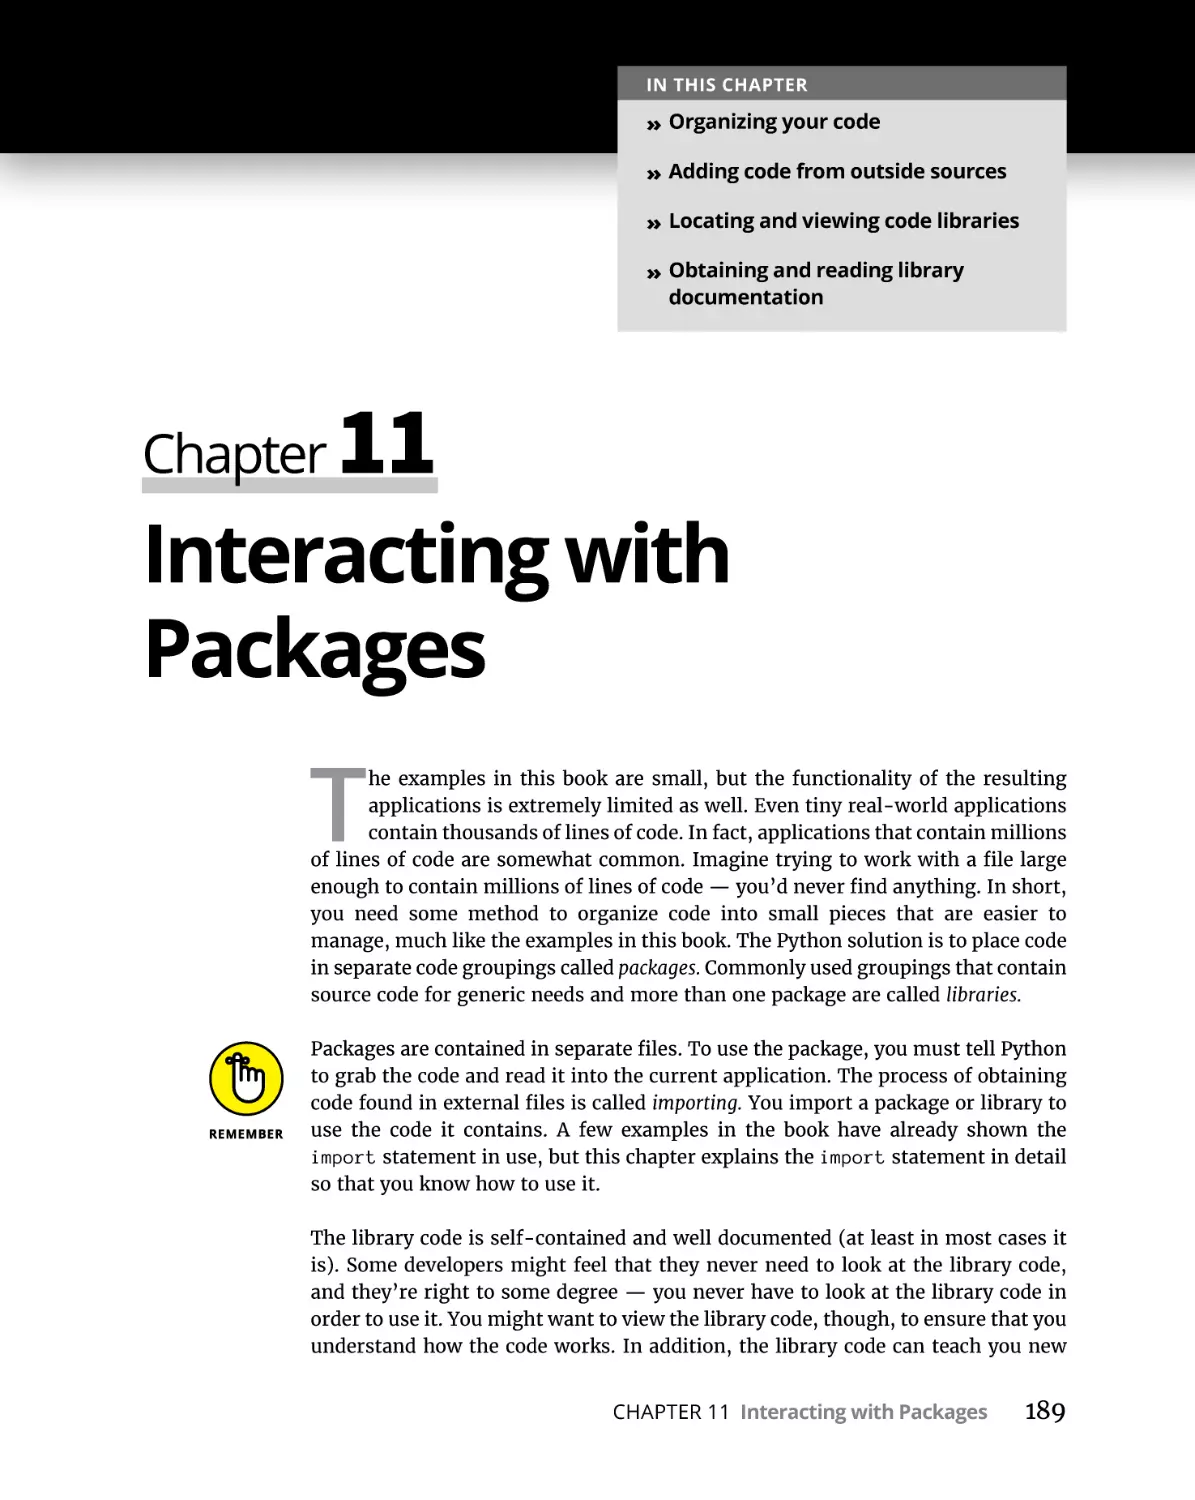 Chapter 11 Interacting with Packages